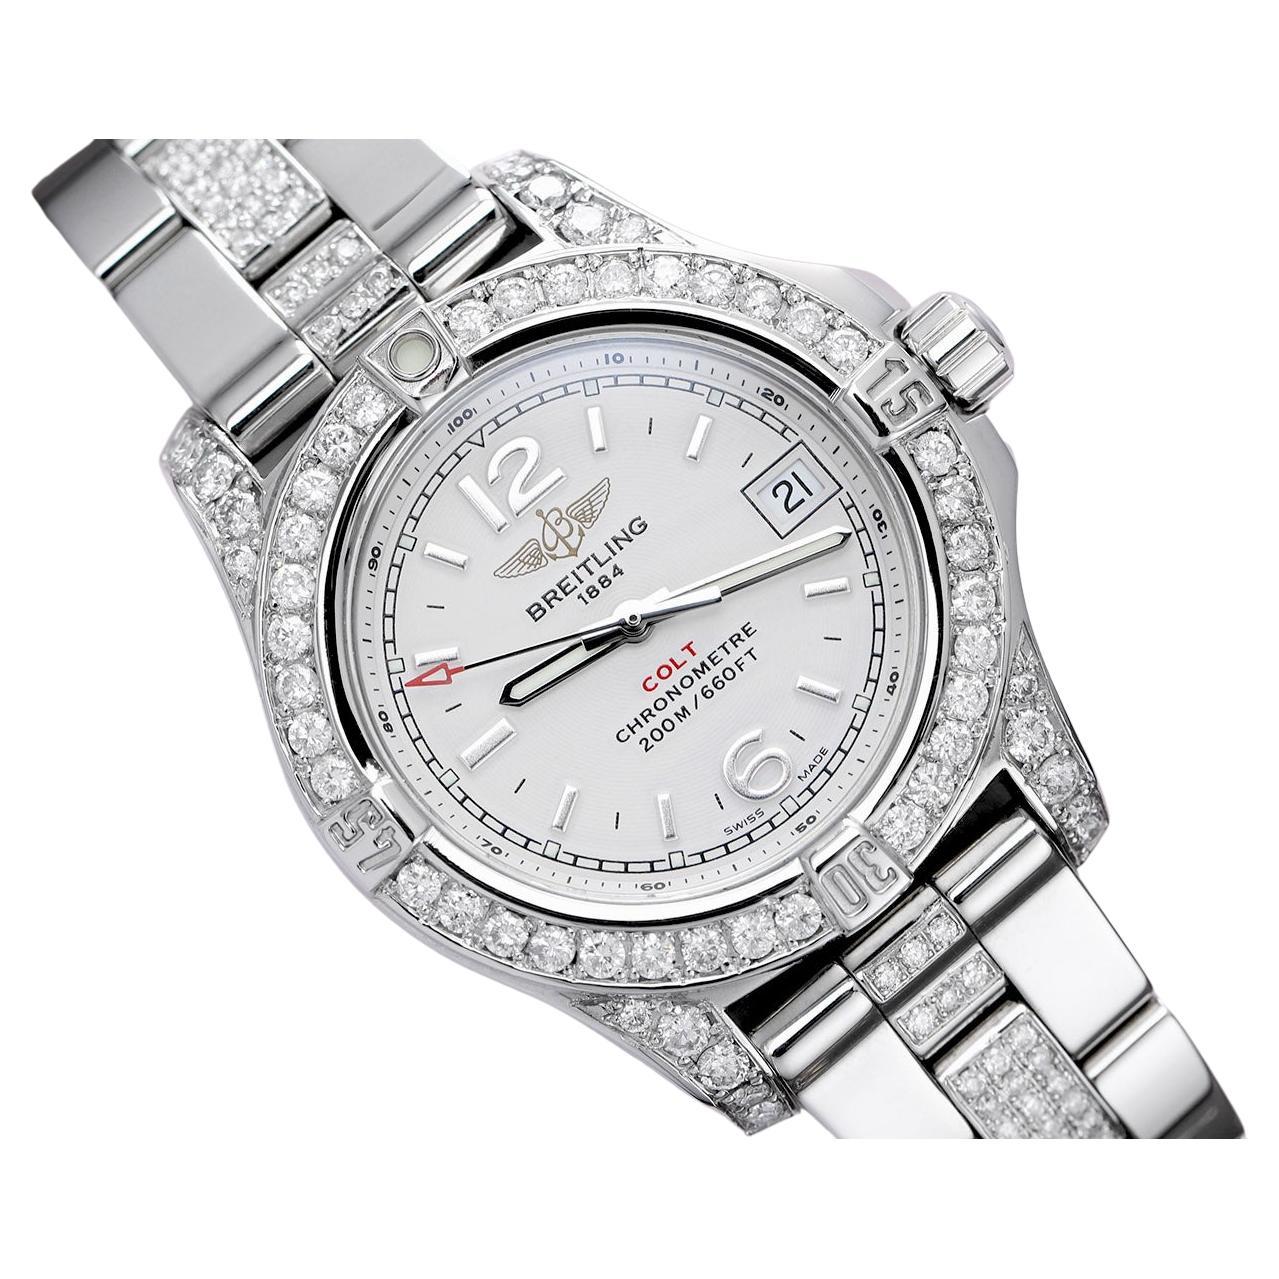 Breitling Colt 33 A77388 White Dial Stainless Steel Ladies Watch with Diamonds